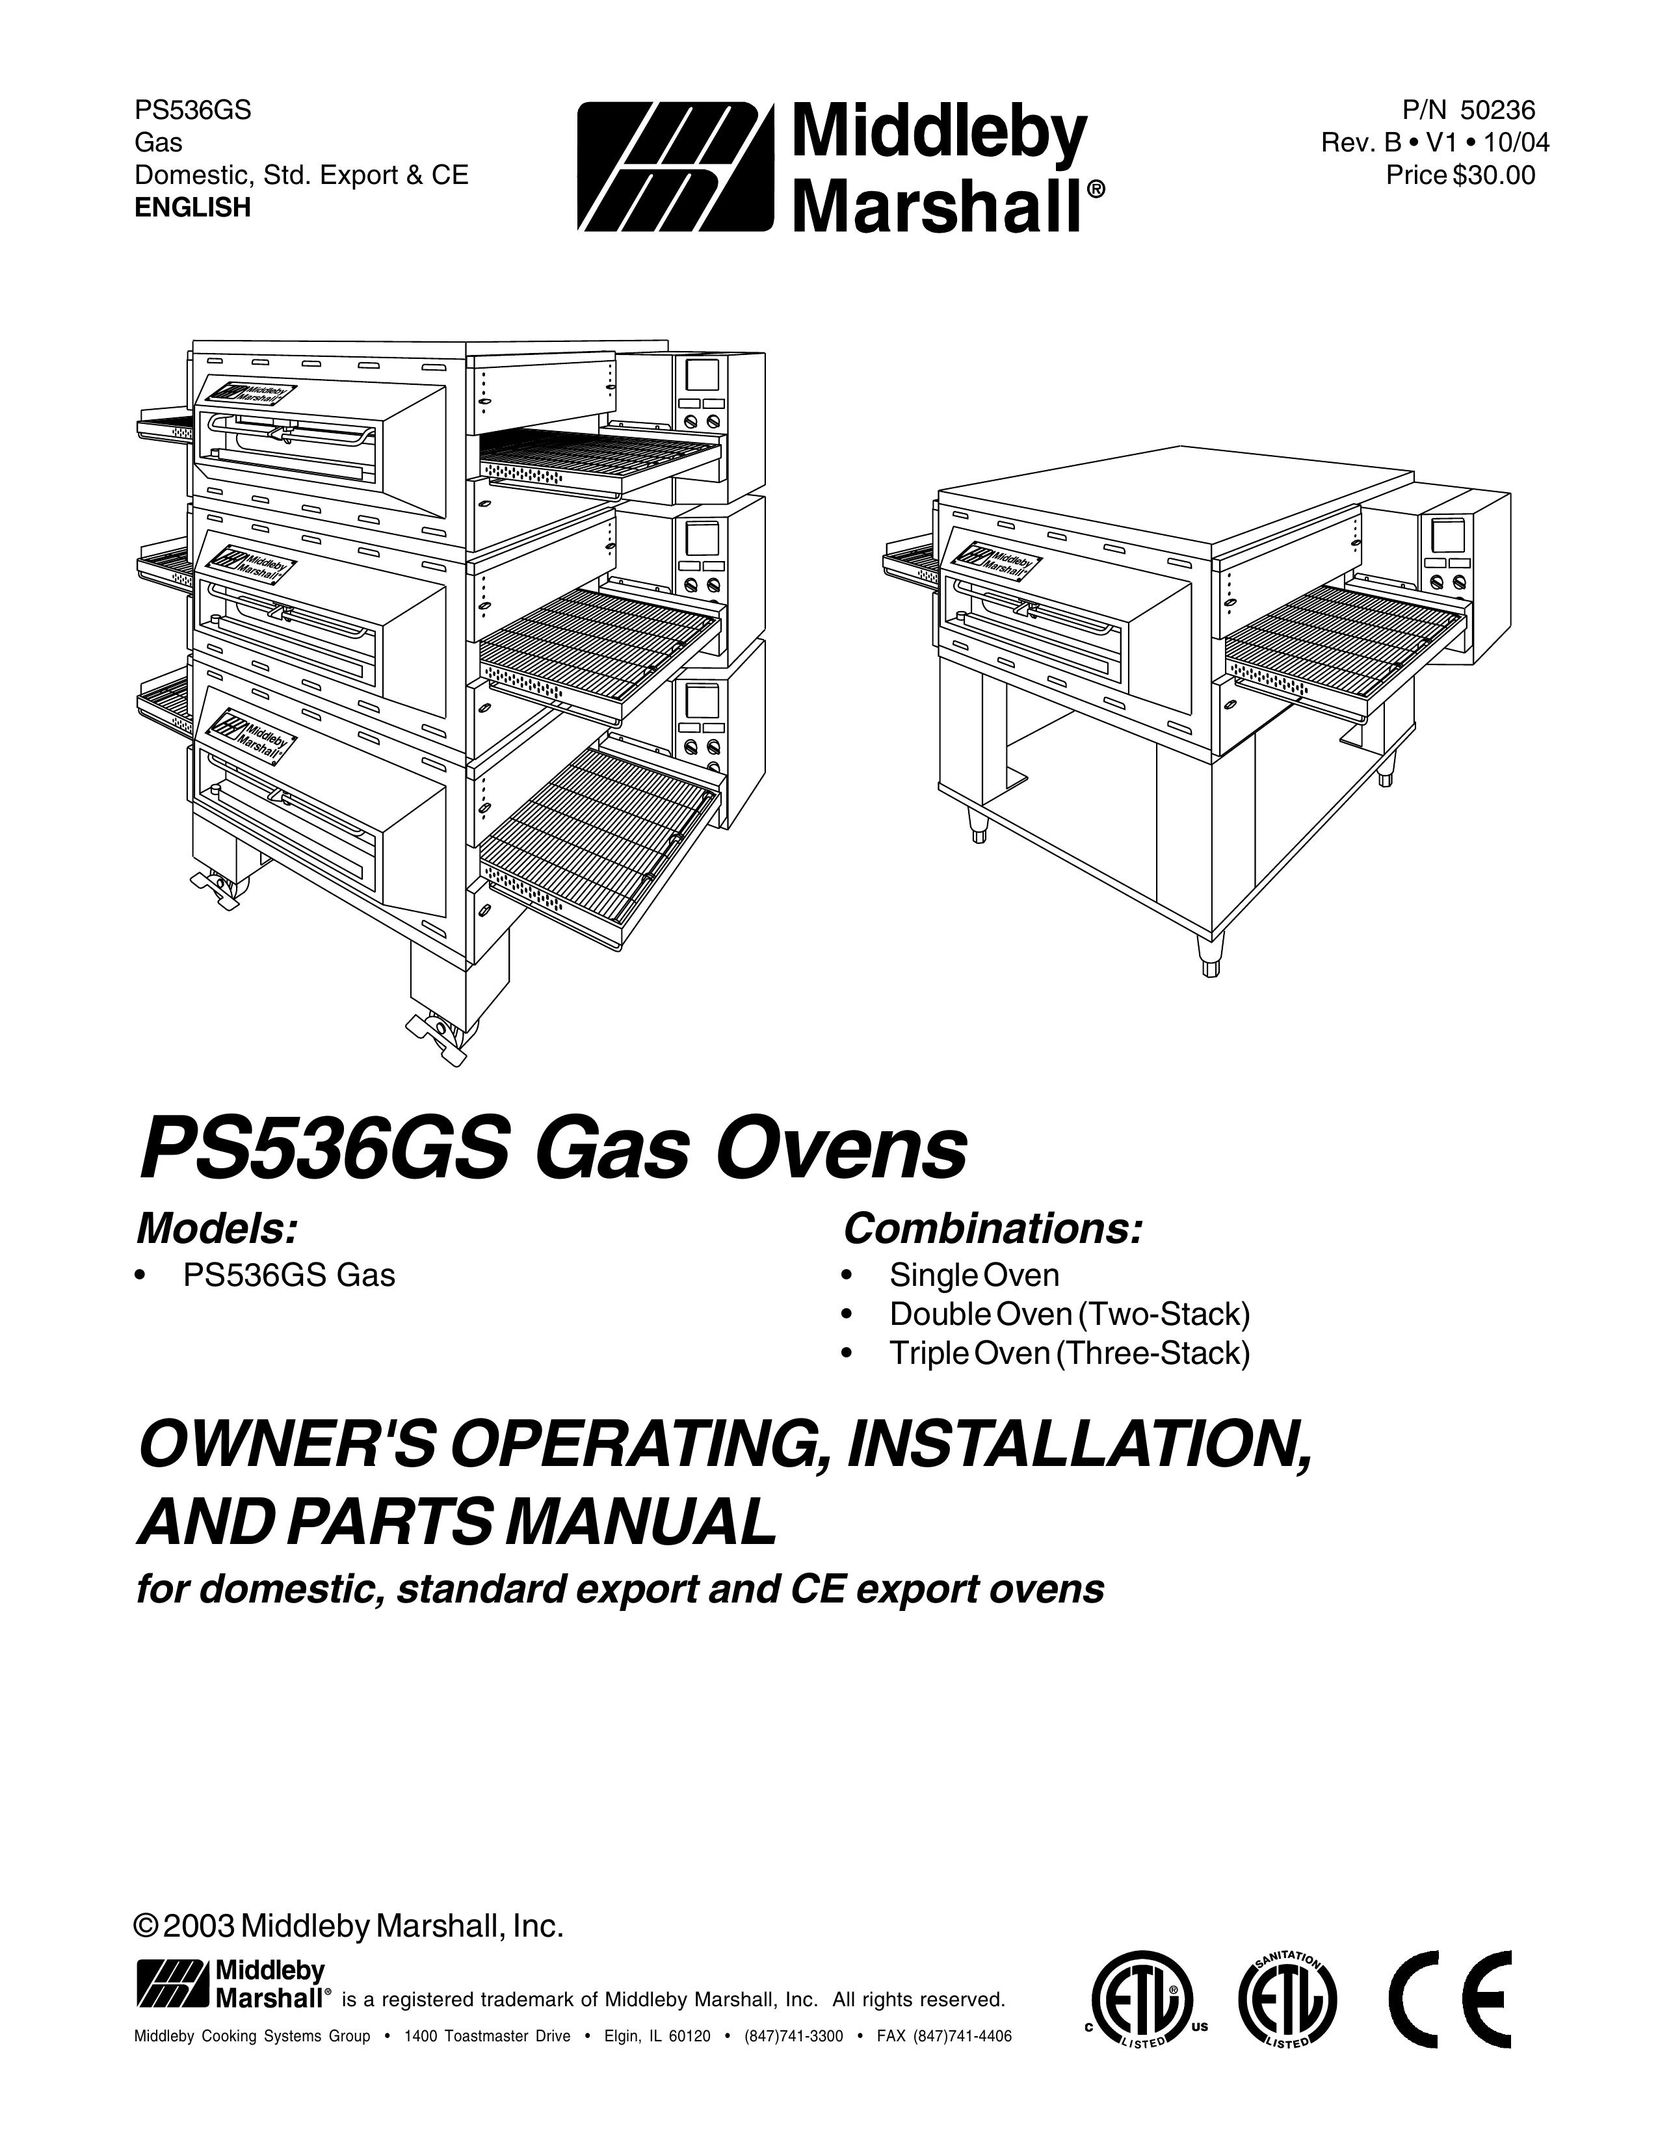 Middleby Marshall PS53GS Gas Oven User Manual